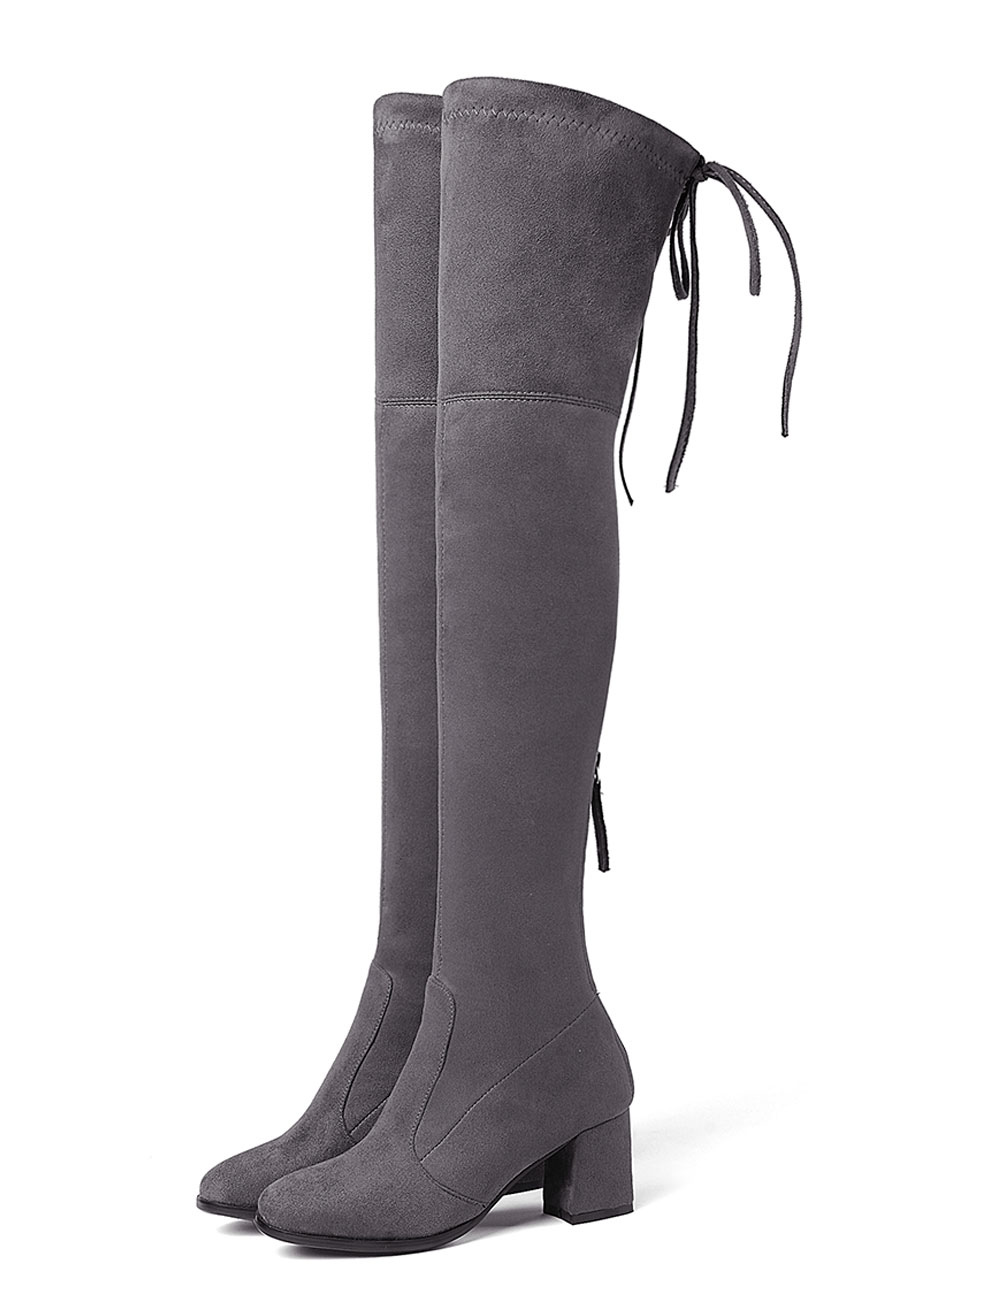 Grey Over The Knee Boots Women Round Toe Chunky Heel Stretch Thigh High Boots 9585